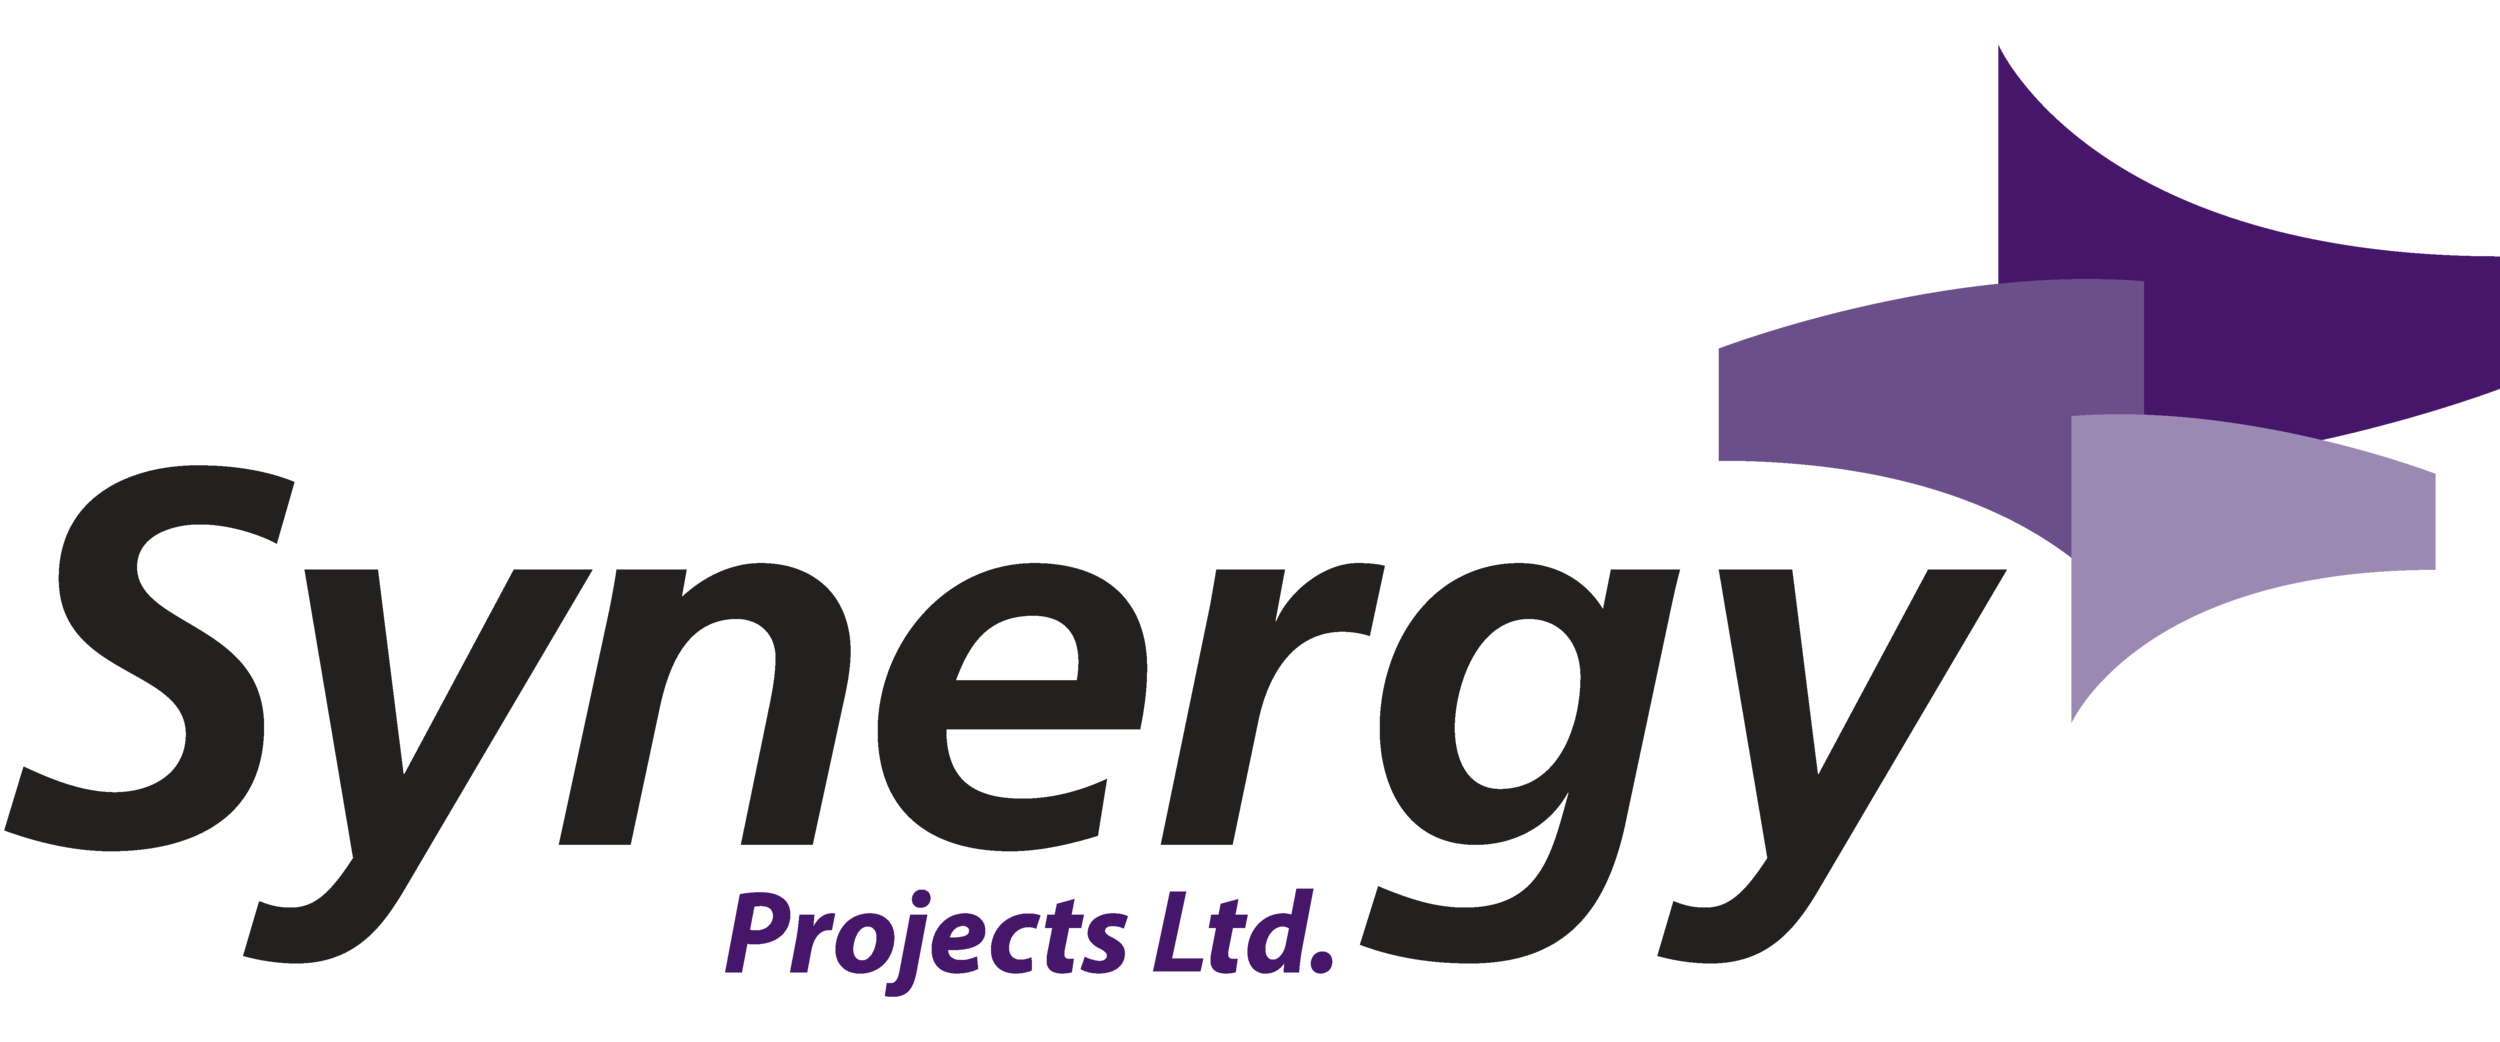 Logo for Synergy Projects Ltd.